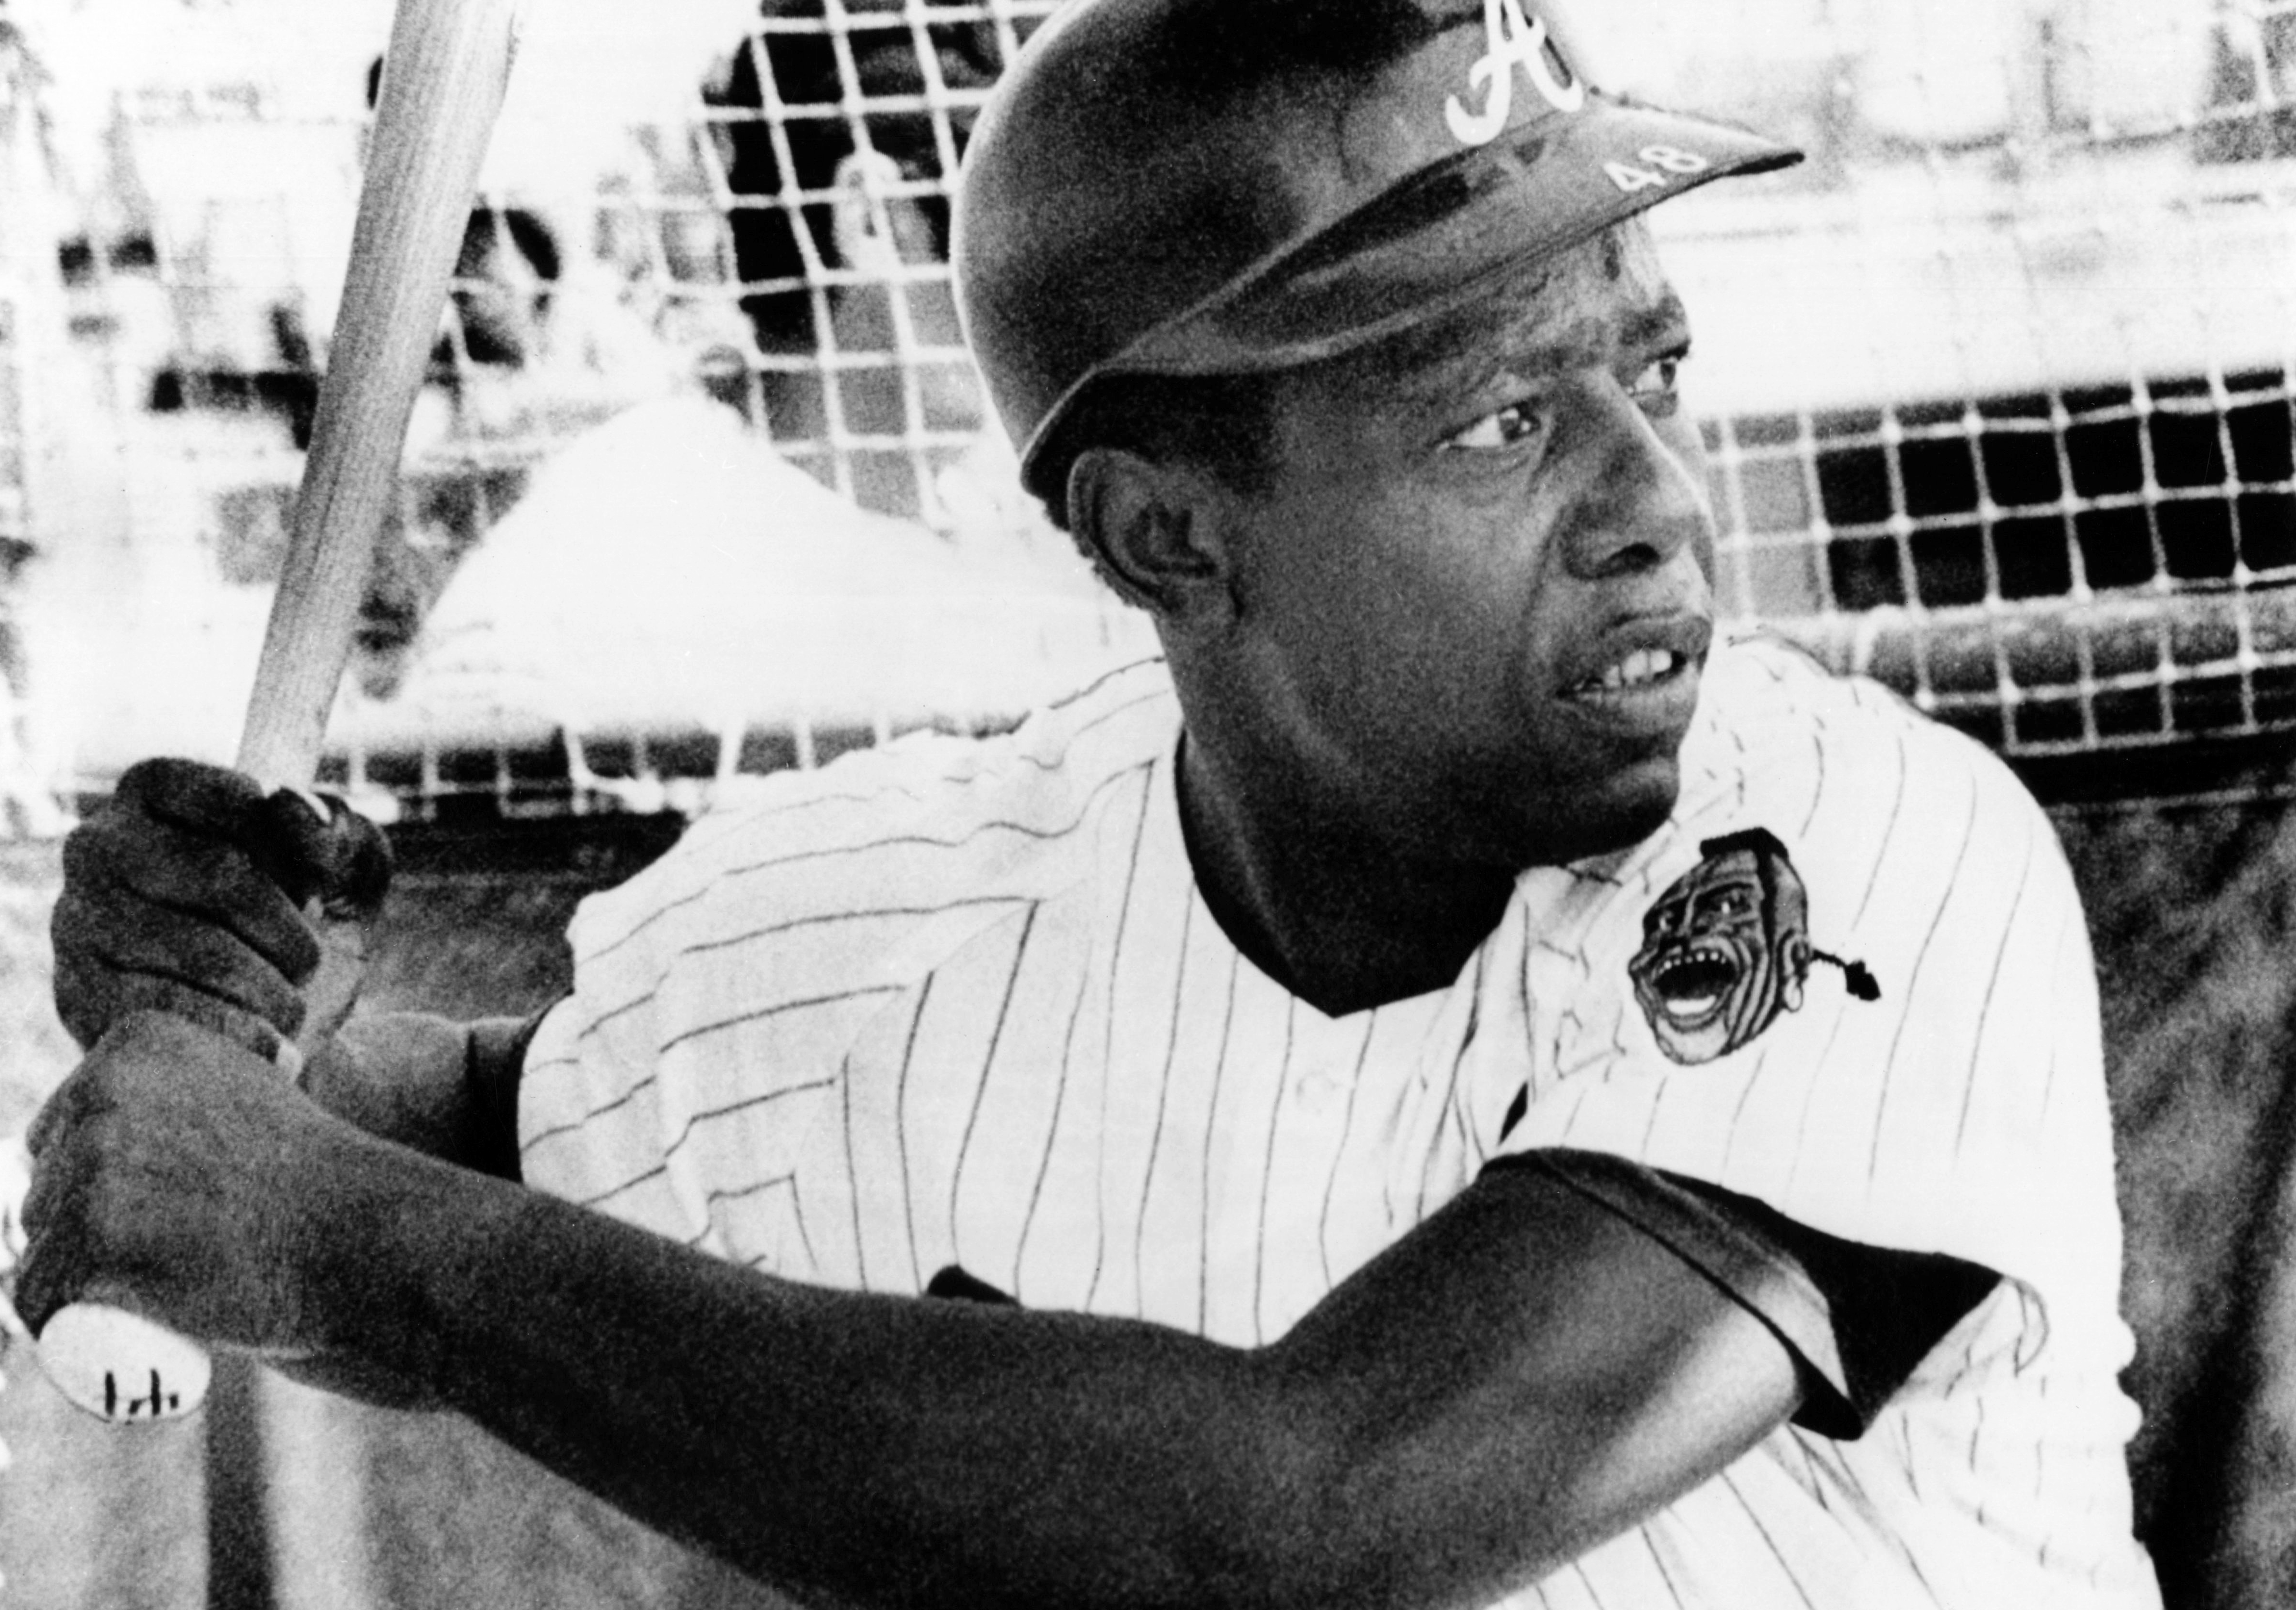 Hank Aaron dies at 86: Sports world mourns passing of baseball legend